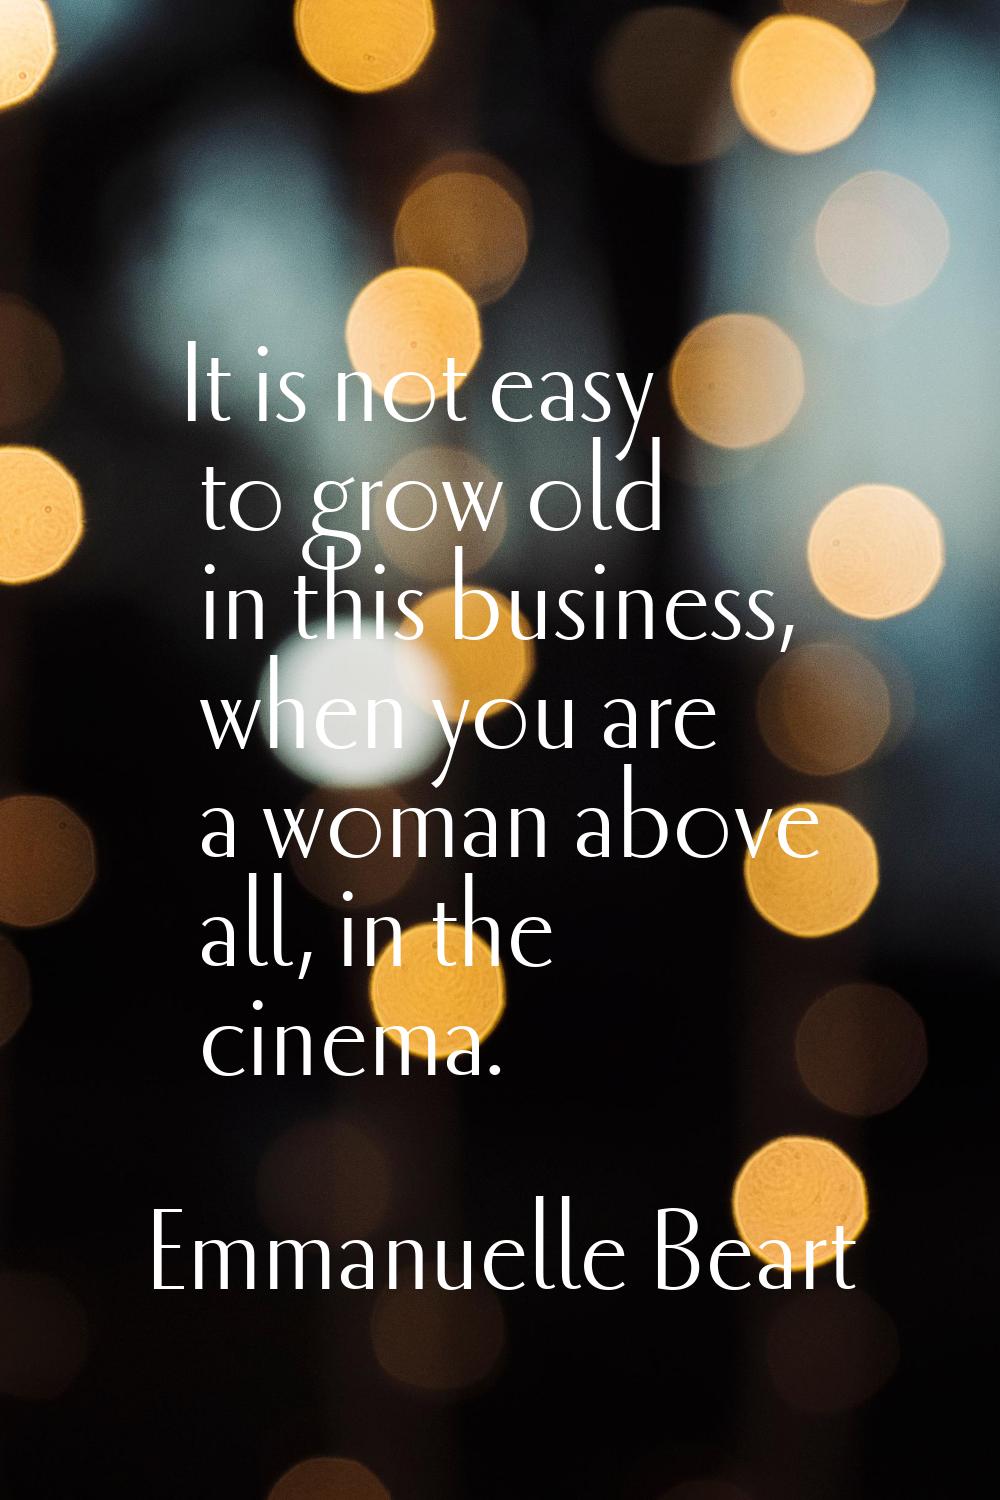 It is not easy to grow old in this business, when you are a woman above all, in the cinema.